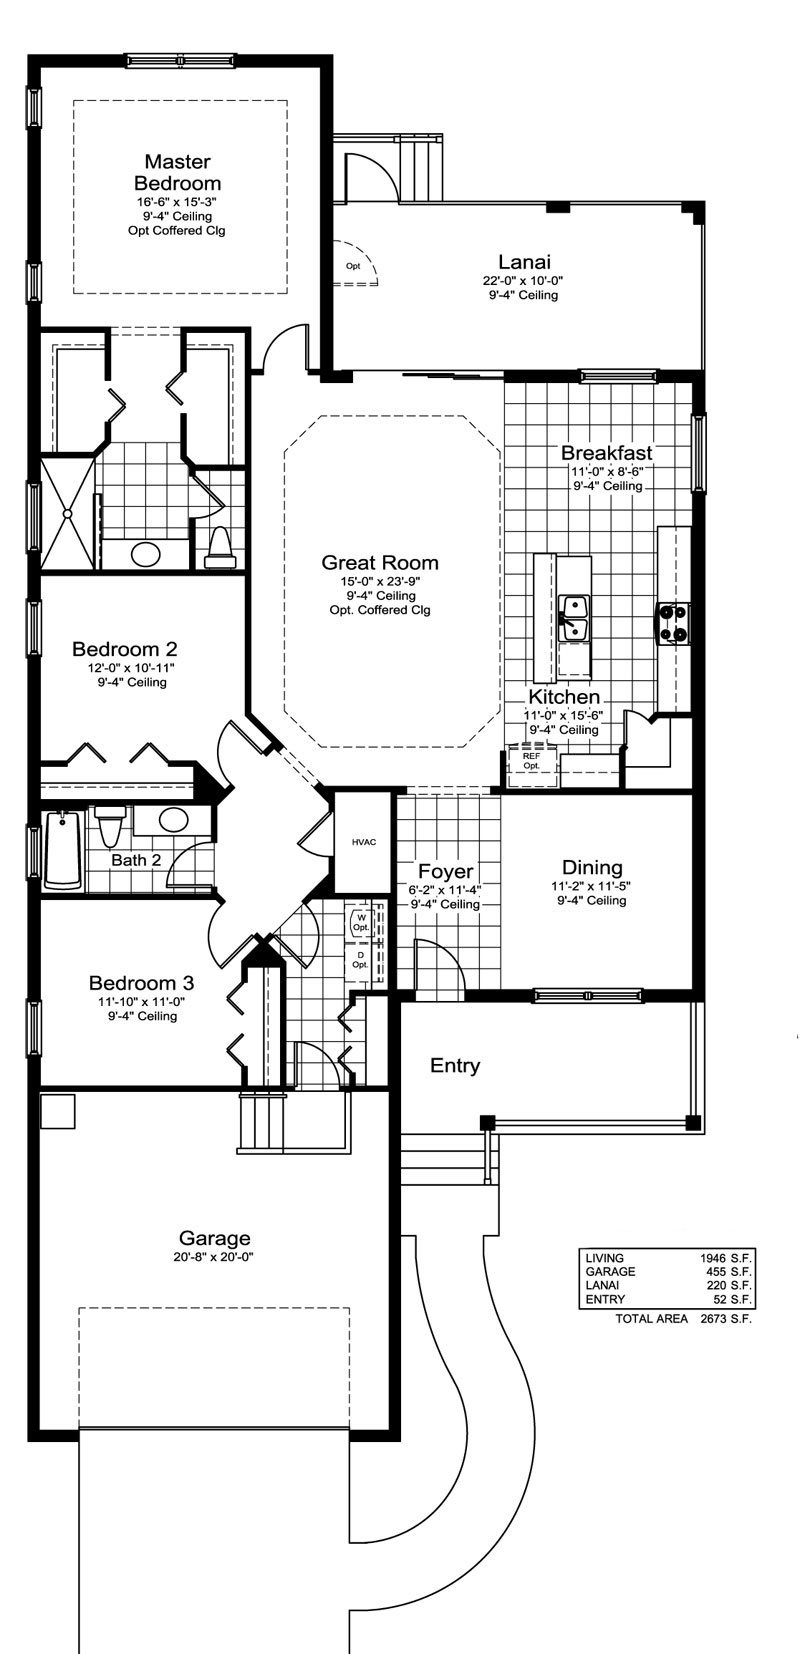 White Sand II Floor Plan in Reflection Lakes, Naples by Neal Communities, 3 Bedrooms, 2 Bathrooms, 2 Car garage, 1,946 Square feet, 1 Story home